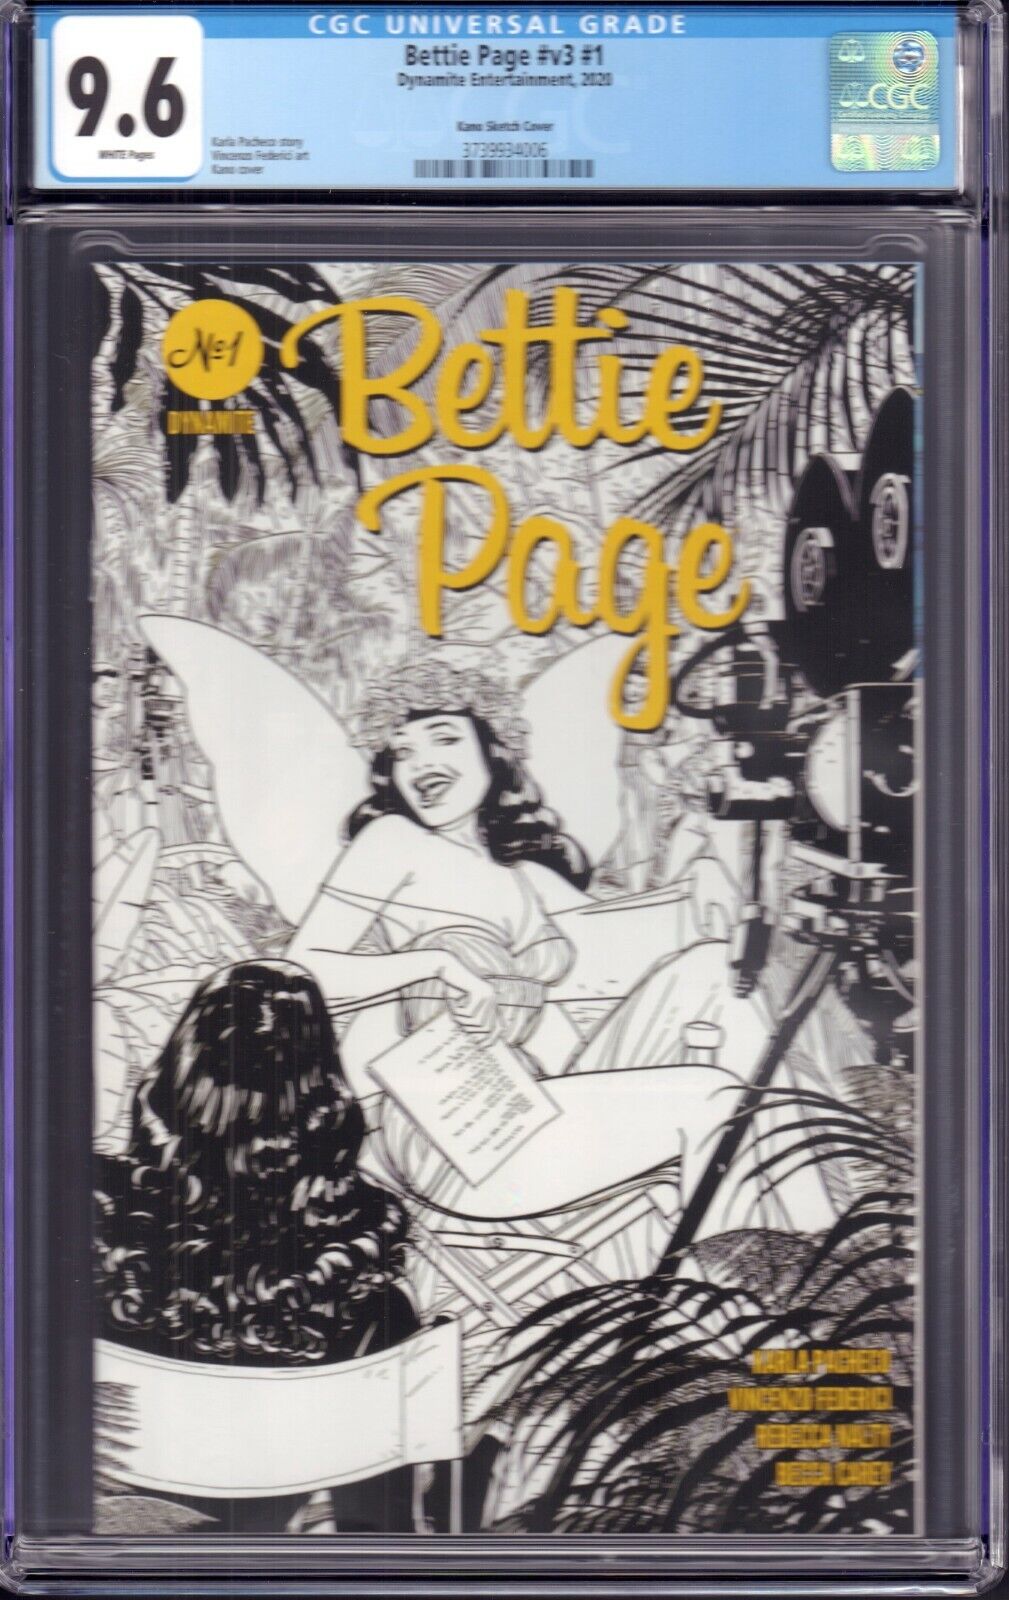 Bettie Page v3 #1 (Dynamite Entertainment, 2020) CGC 9.6 Kano Sketch Cover